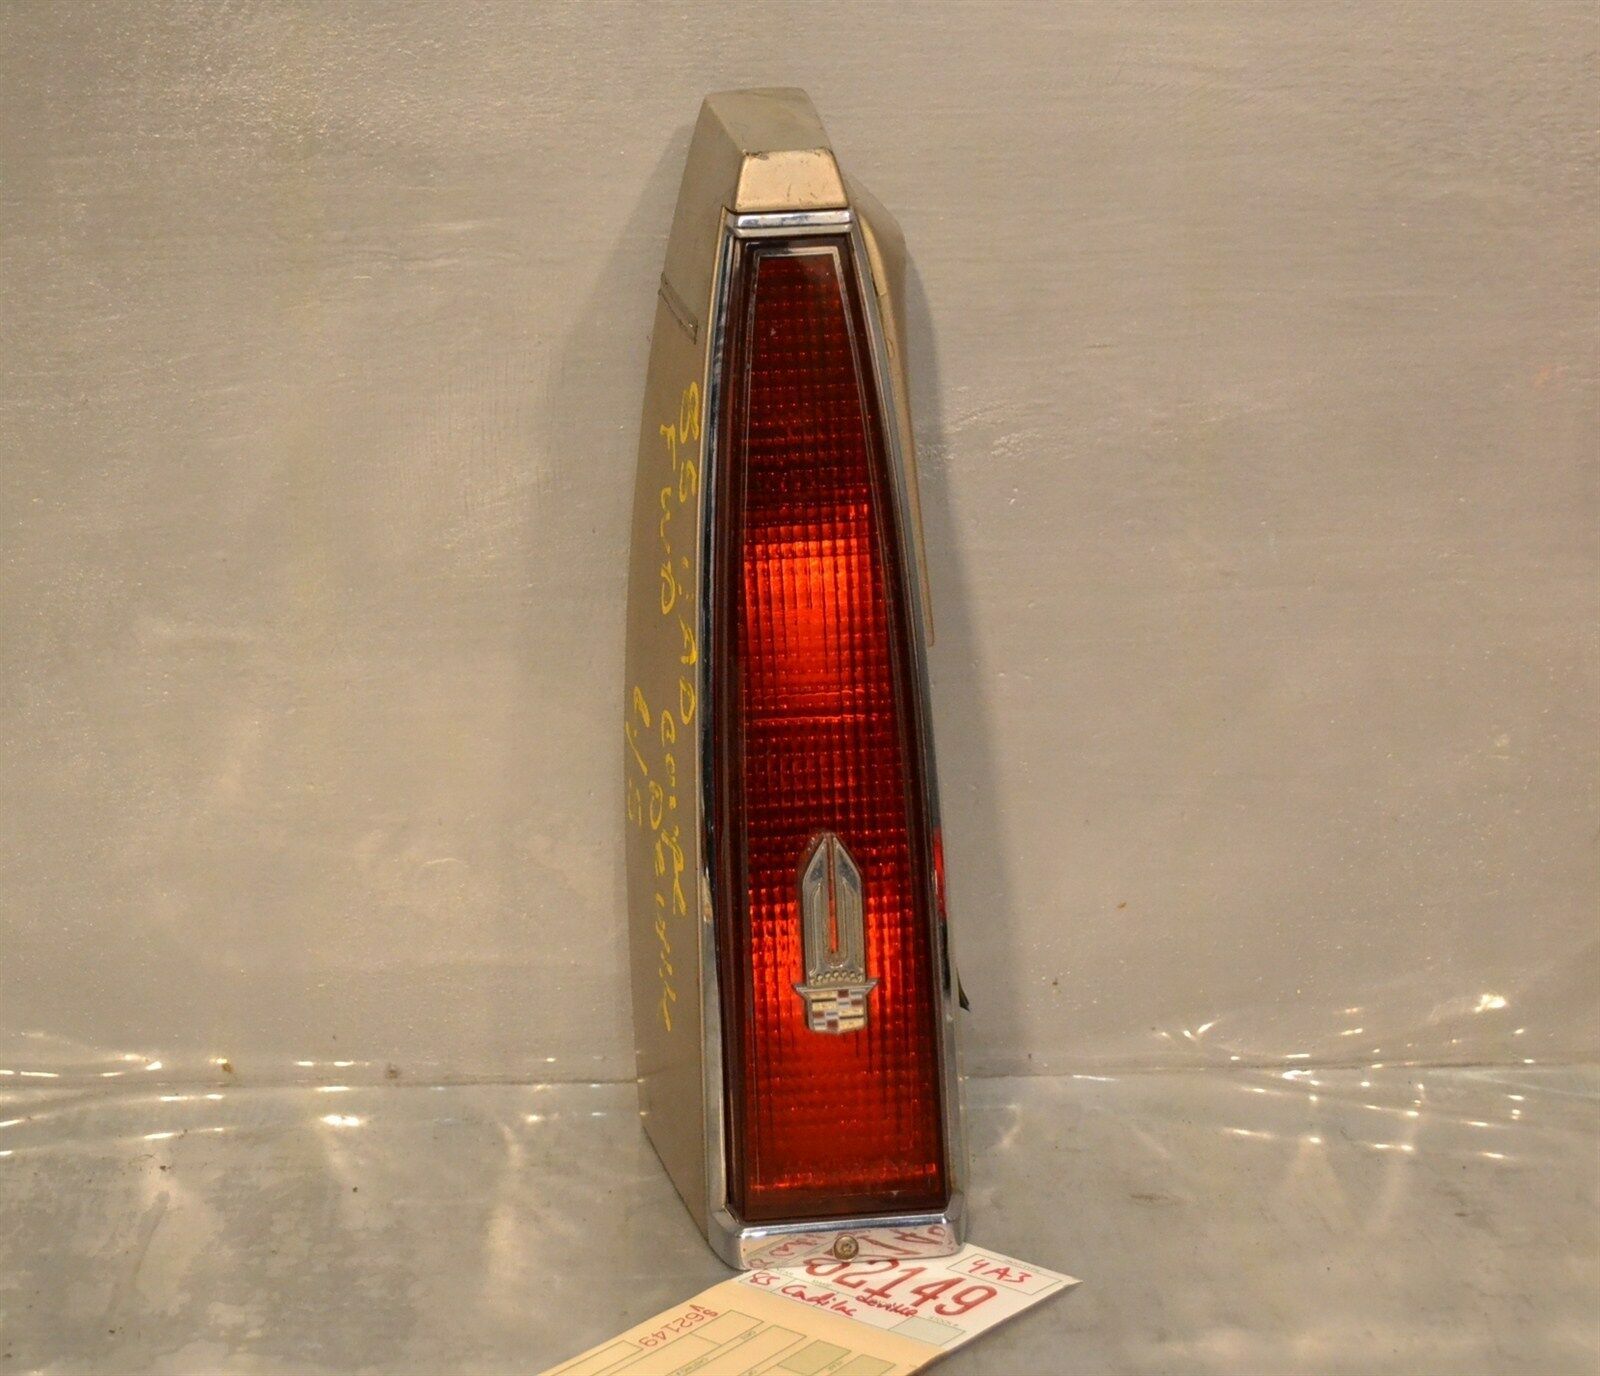 Primary image for 1985-1986 Cadillac Deville fleetwood coupe 2 door tail light & trim 49 4A3